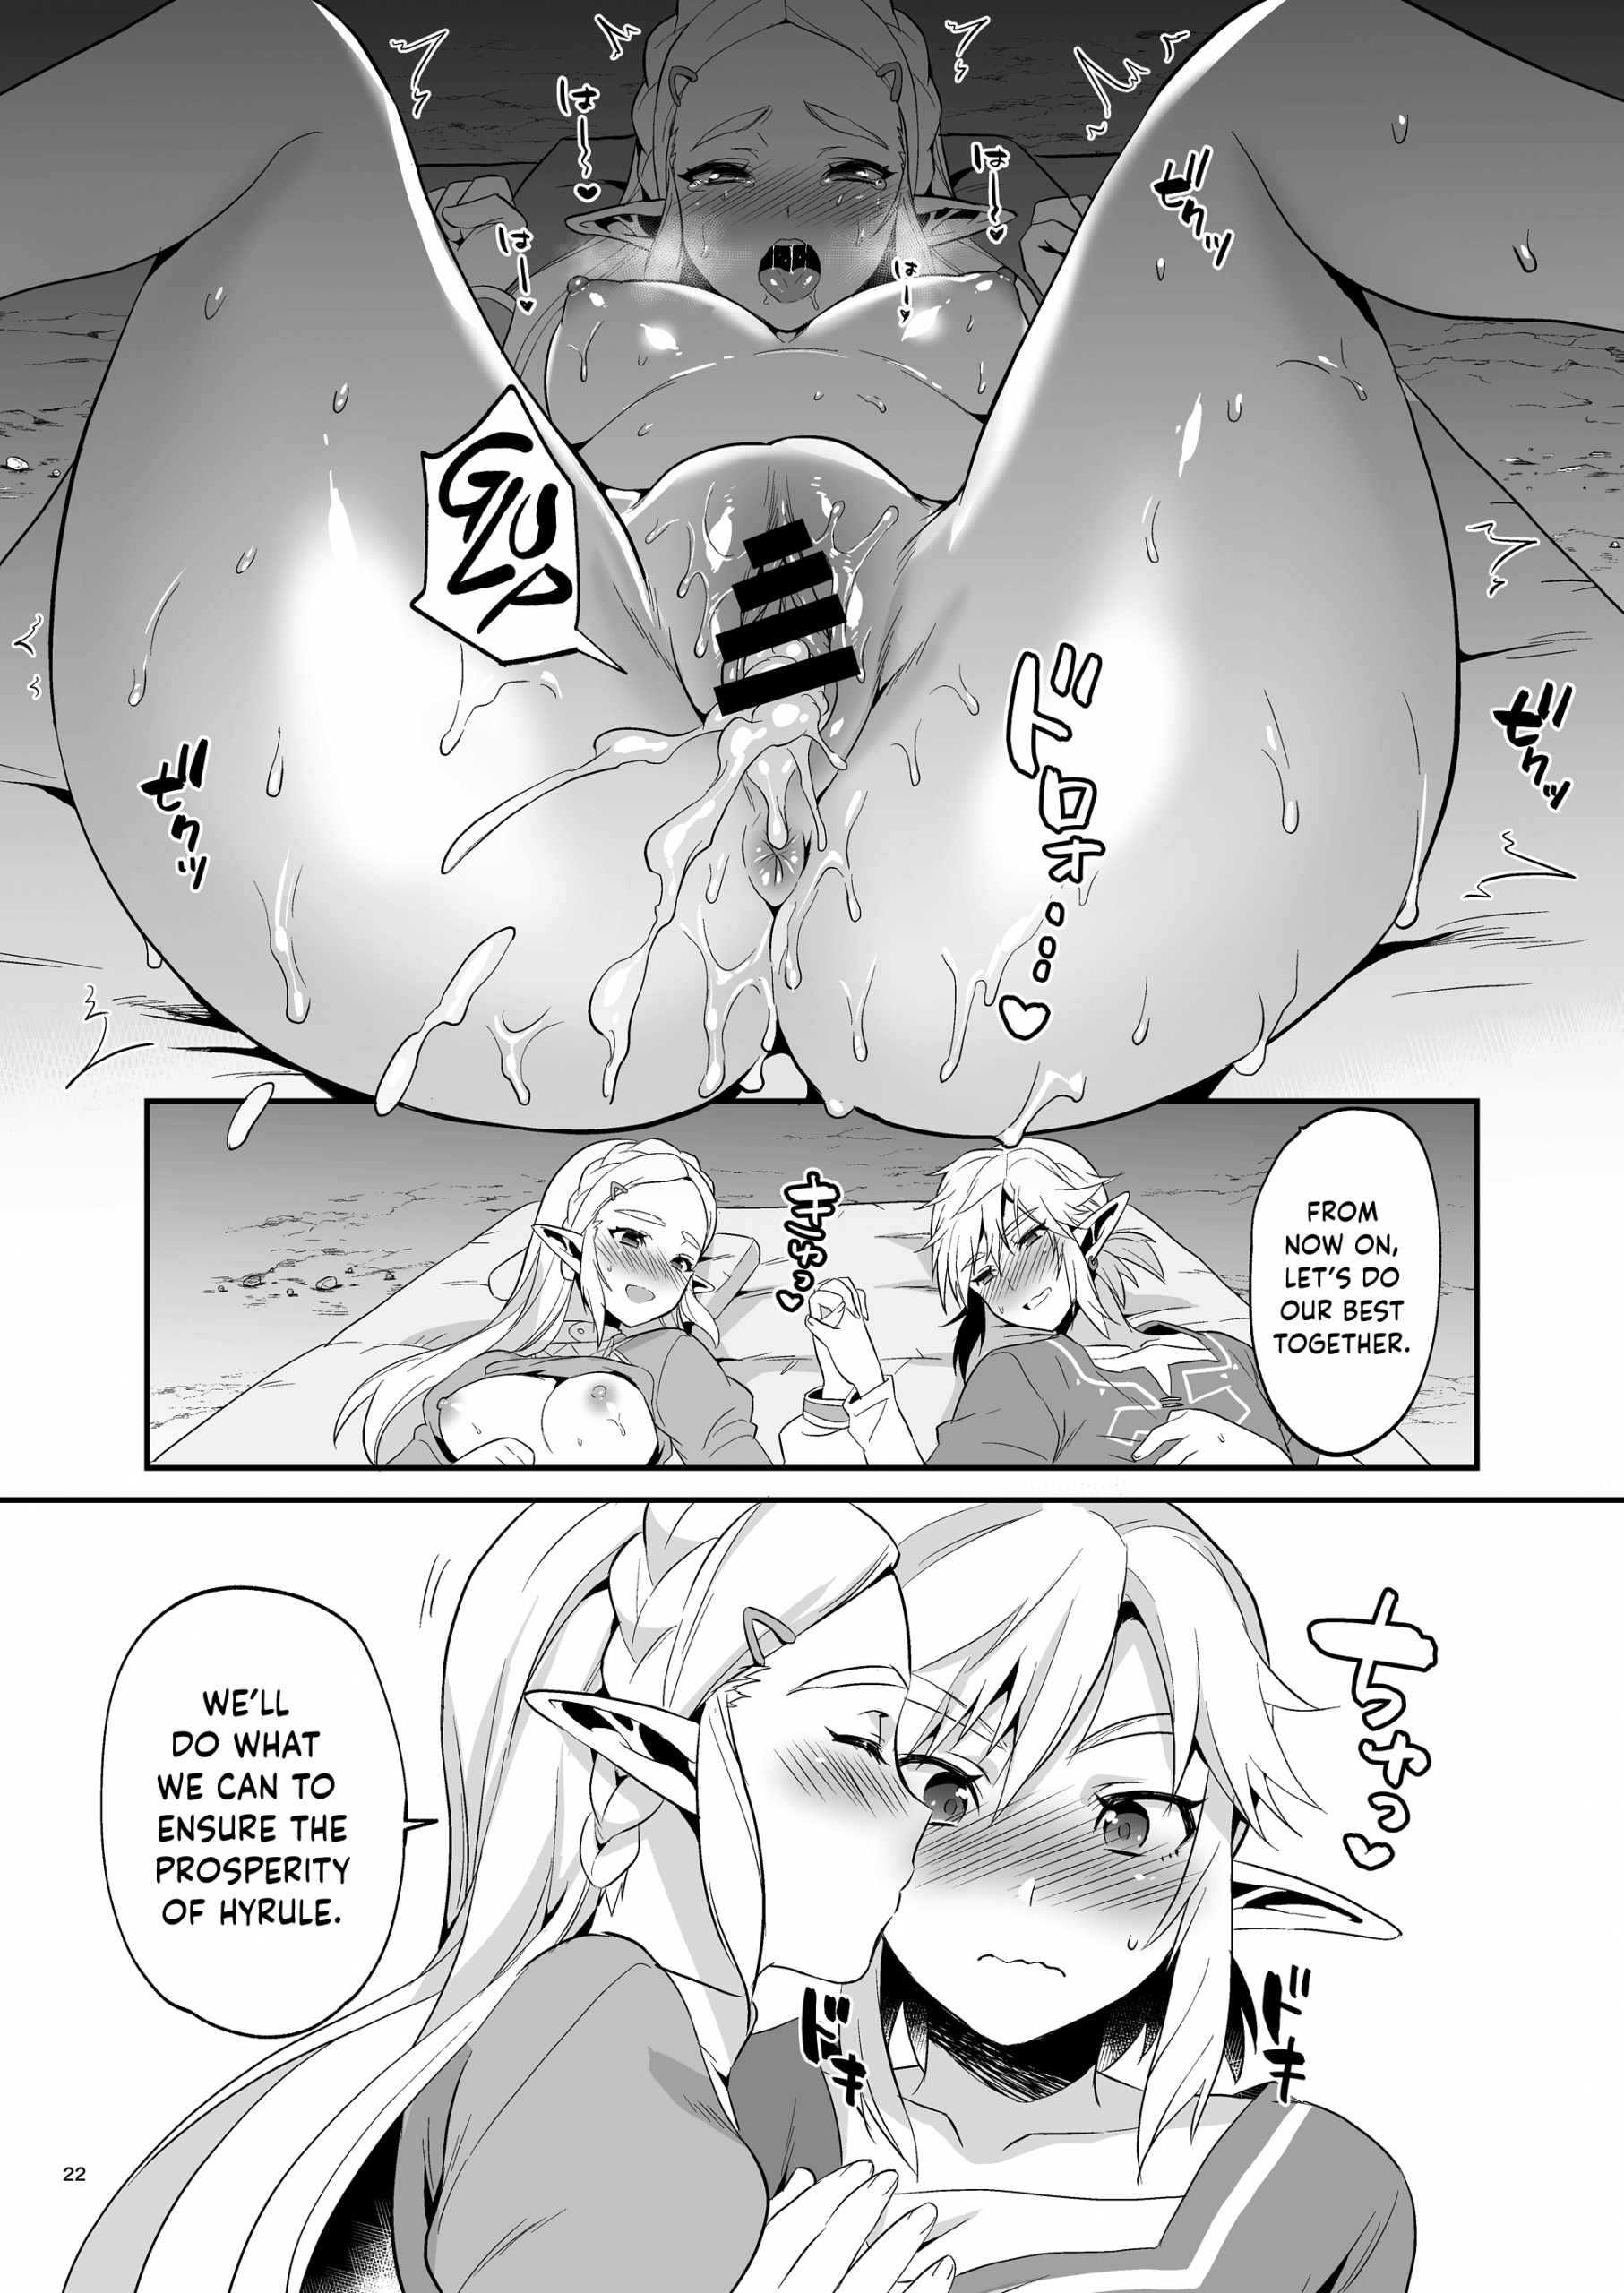 Taking Steps to Ensure Hyrule's Prosperity! hentai manga picture 21